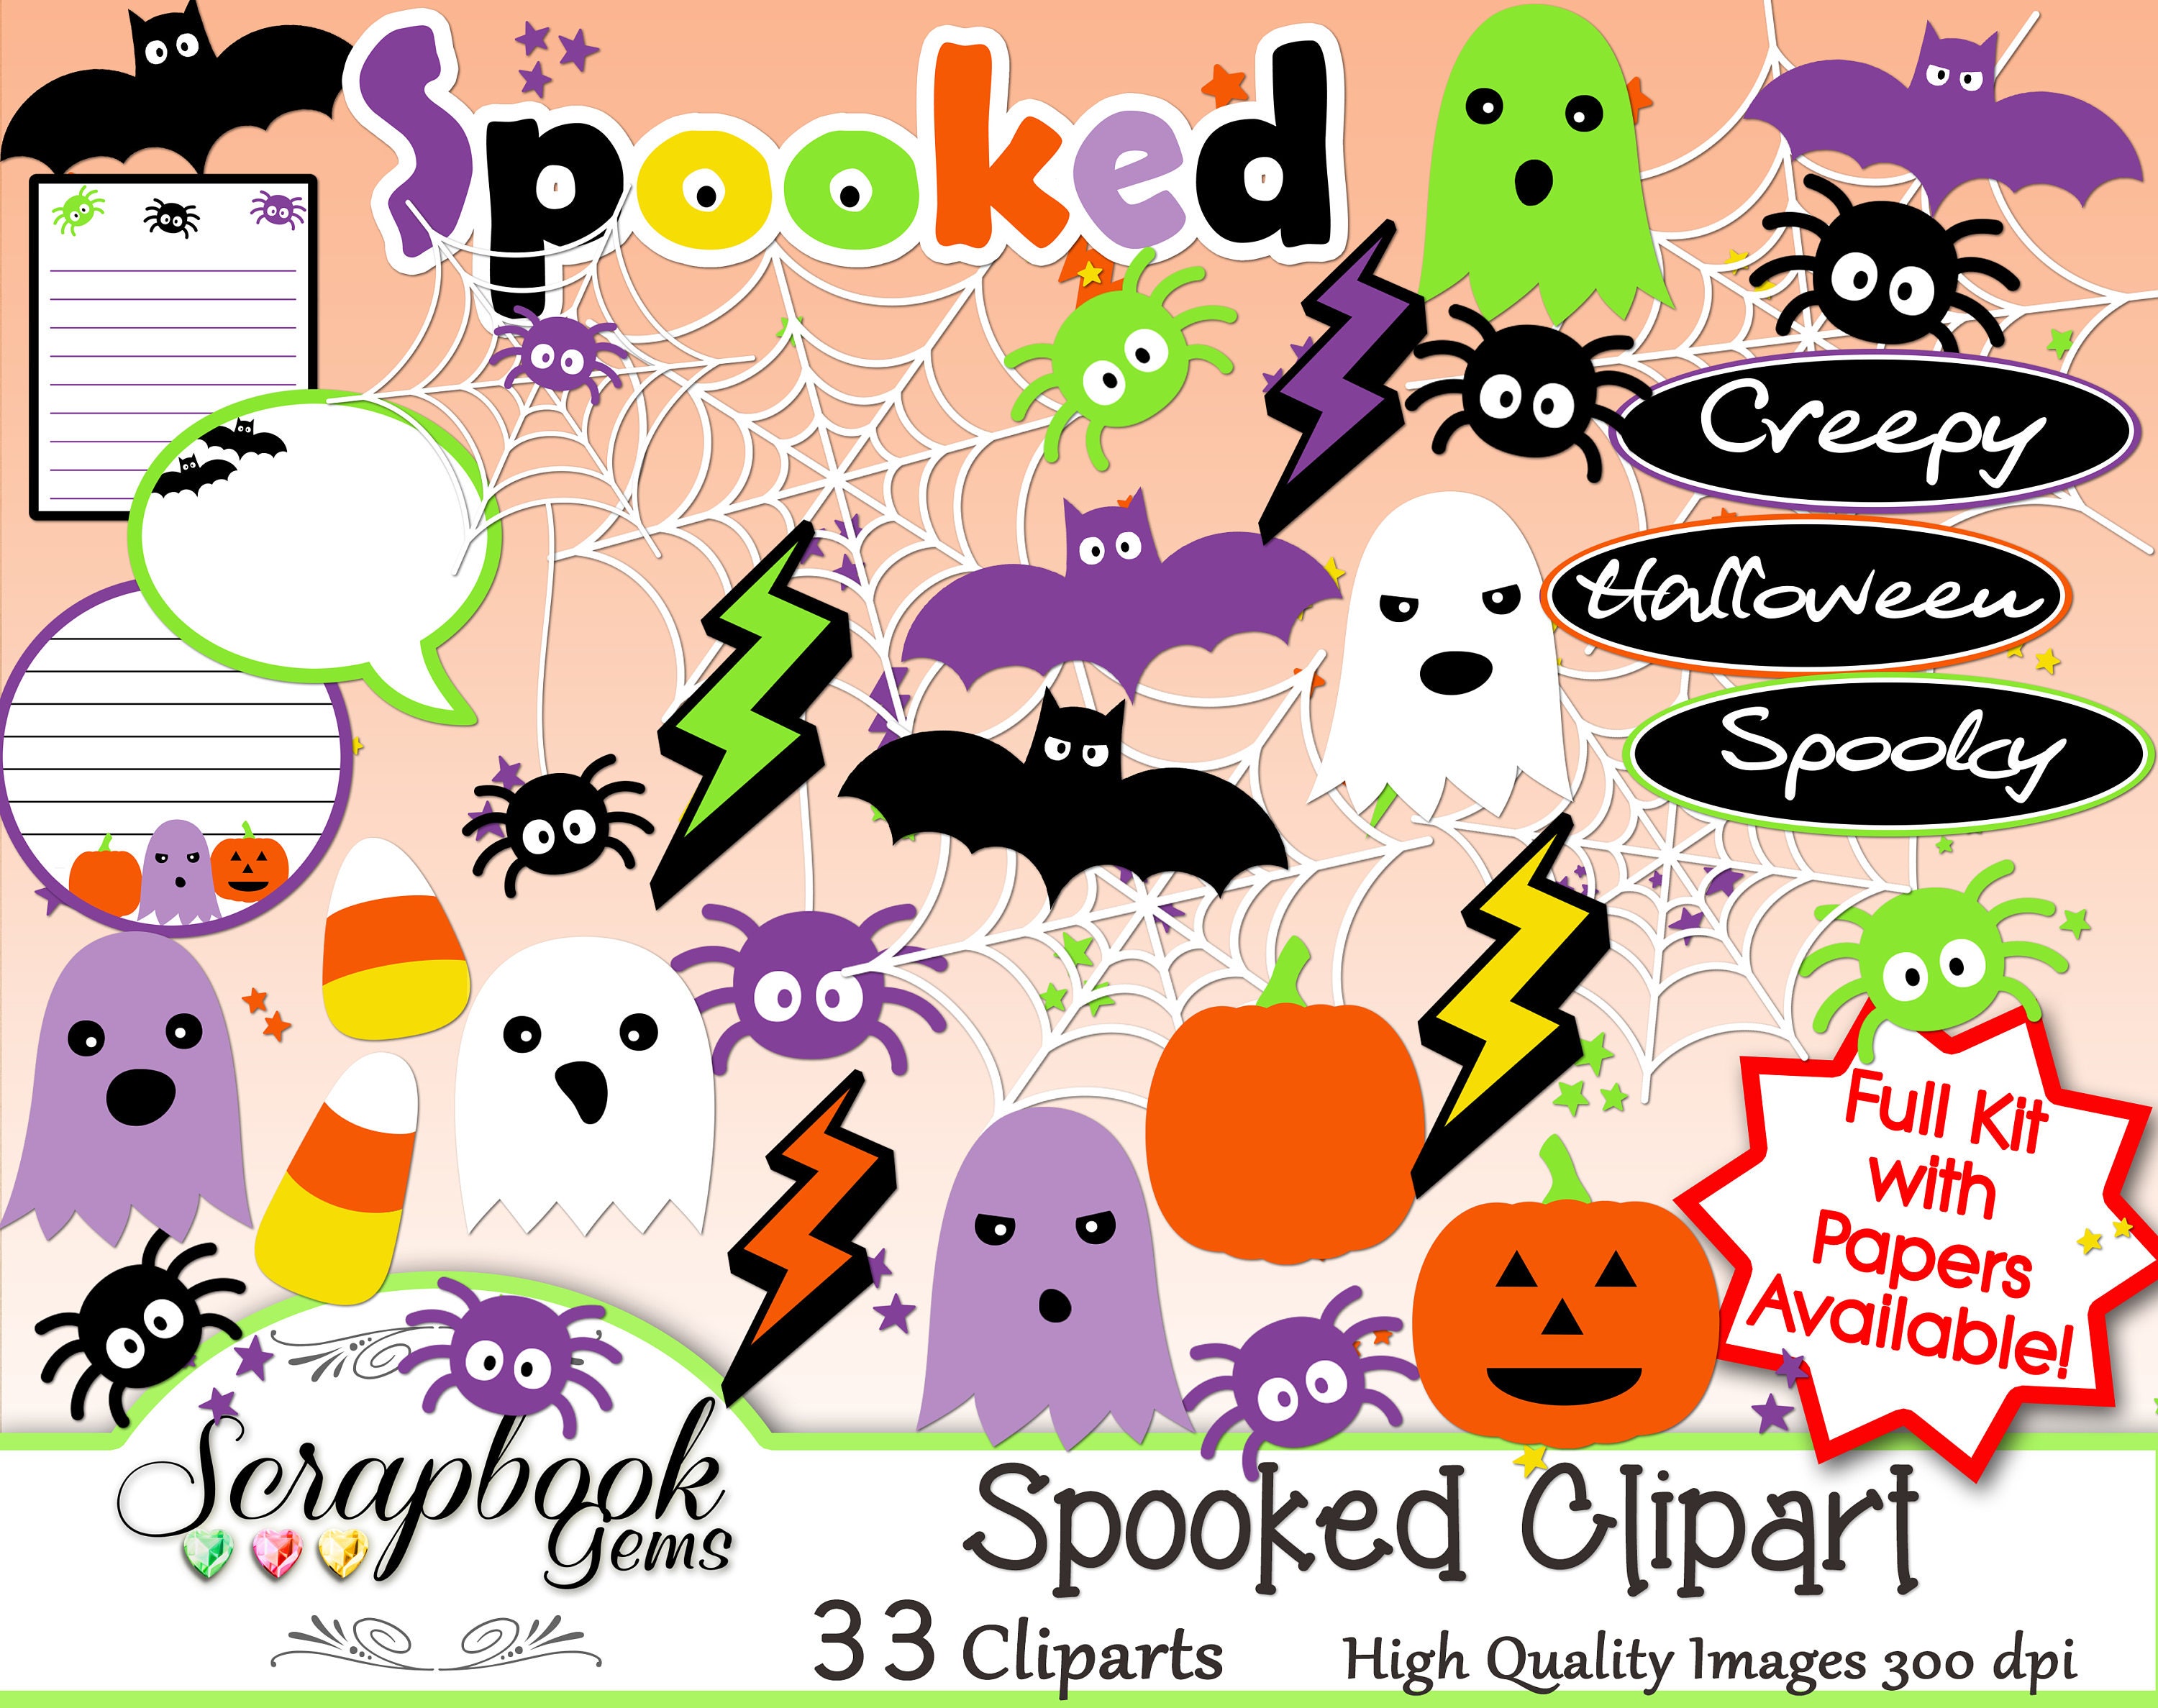 SPOOKED Halloween Clipart, 33 Png Clipart Files Instant Download Tags Ghost  Spider Web Bat Lightning Pumpkin Jack-o-lantern Candy Corn -  Australia